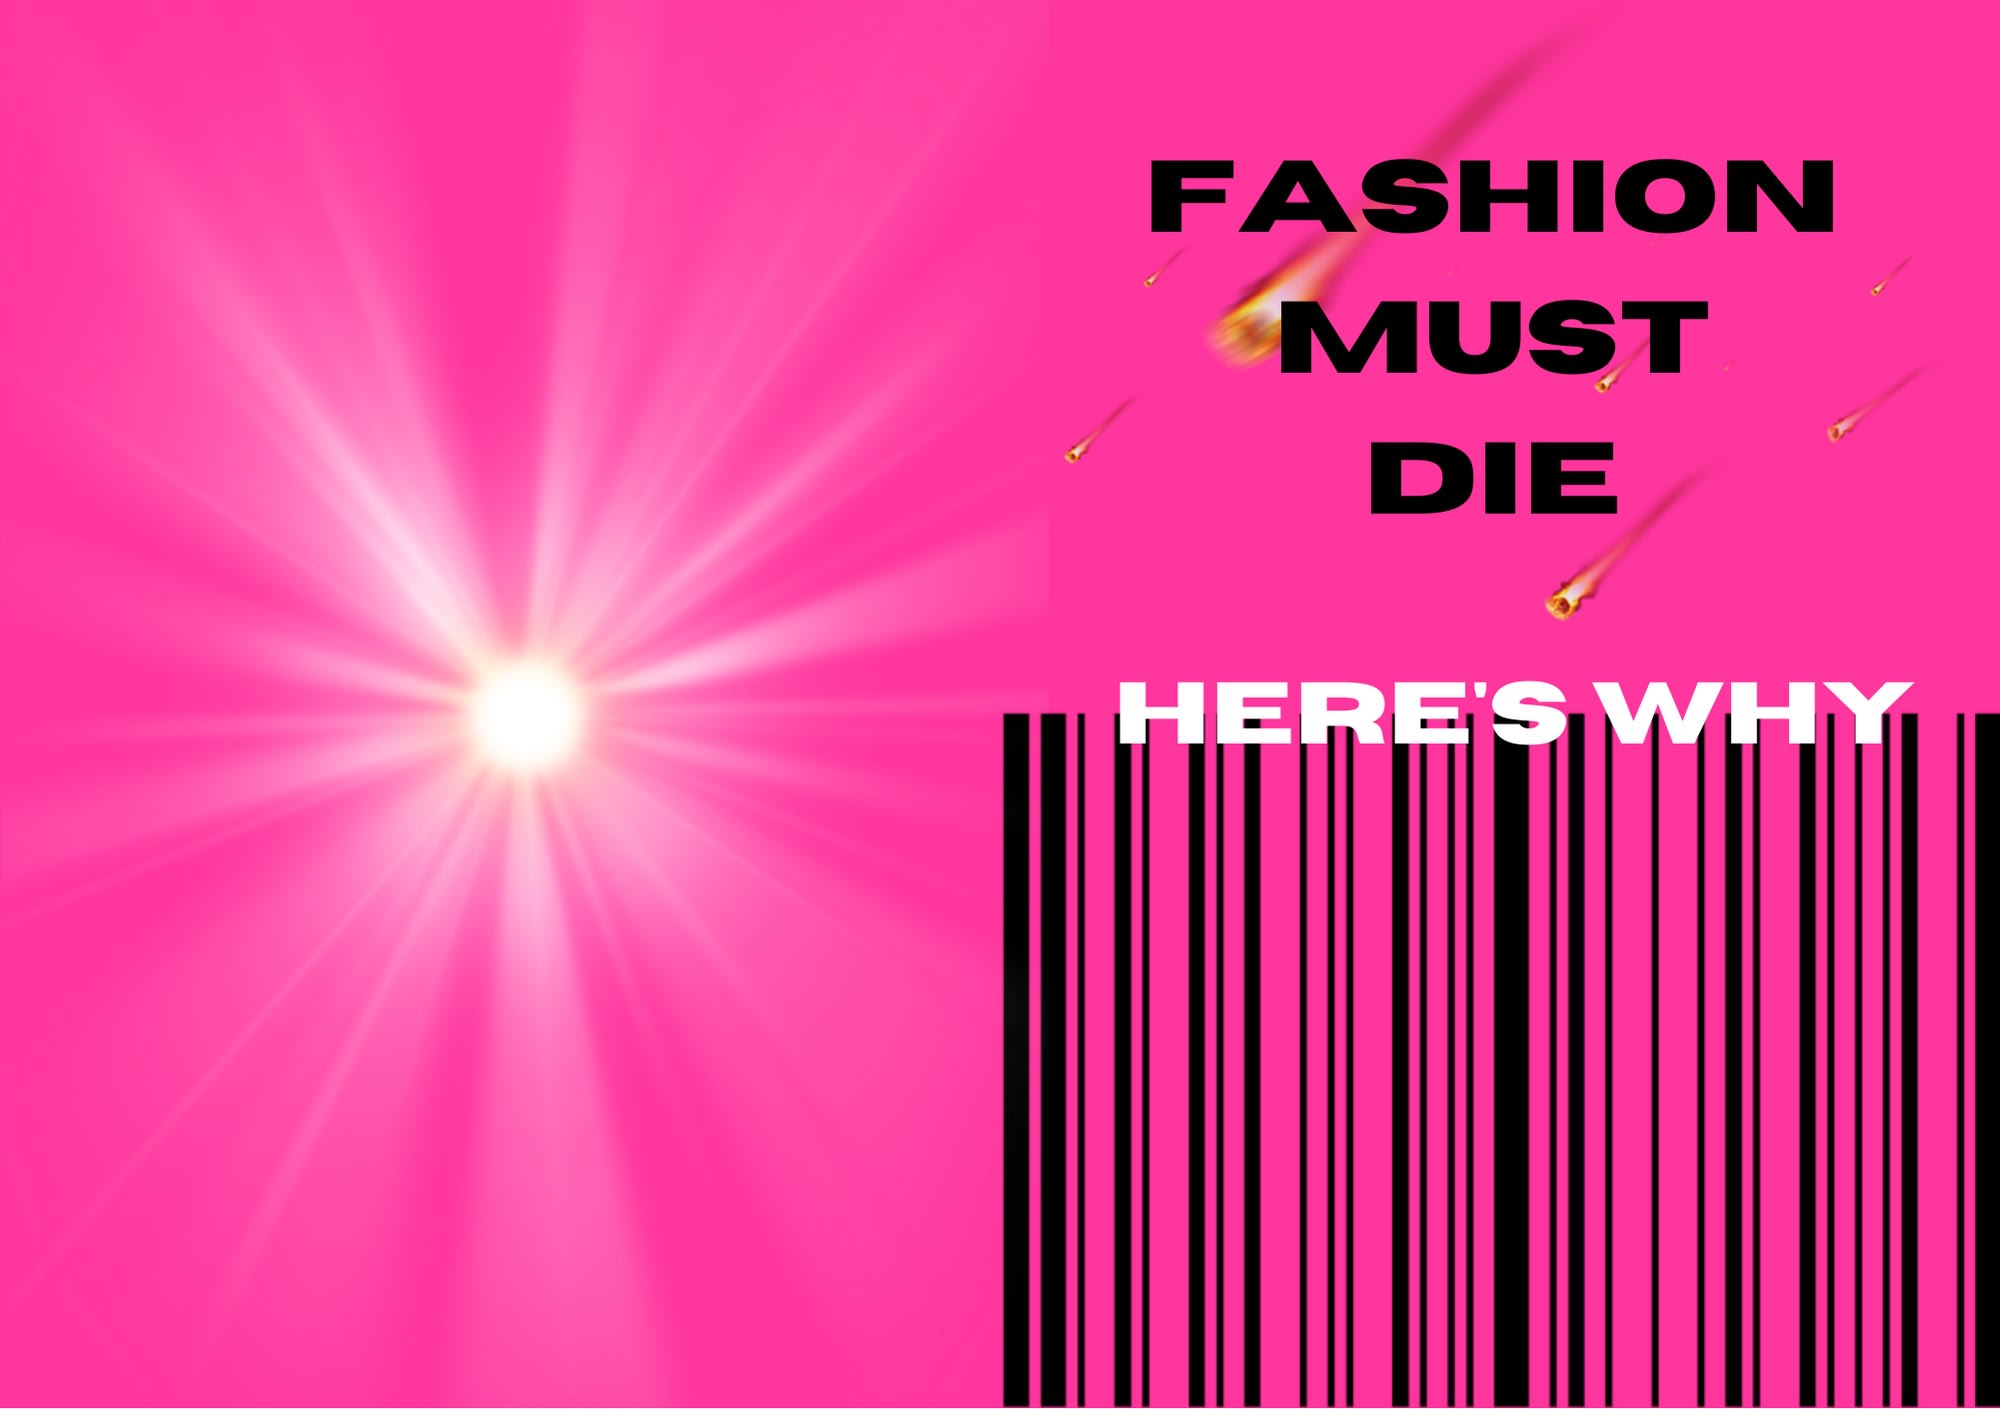 FASHION MUST DIE - HERE’S WHY